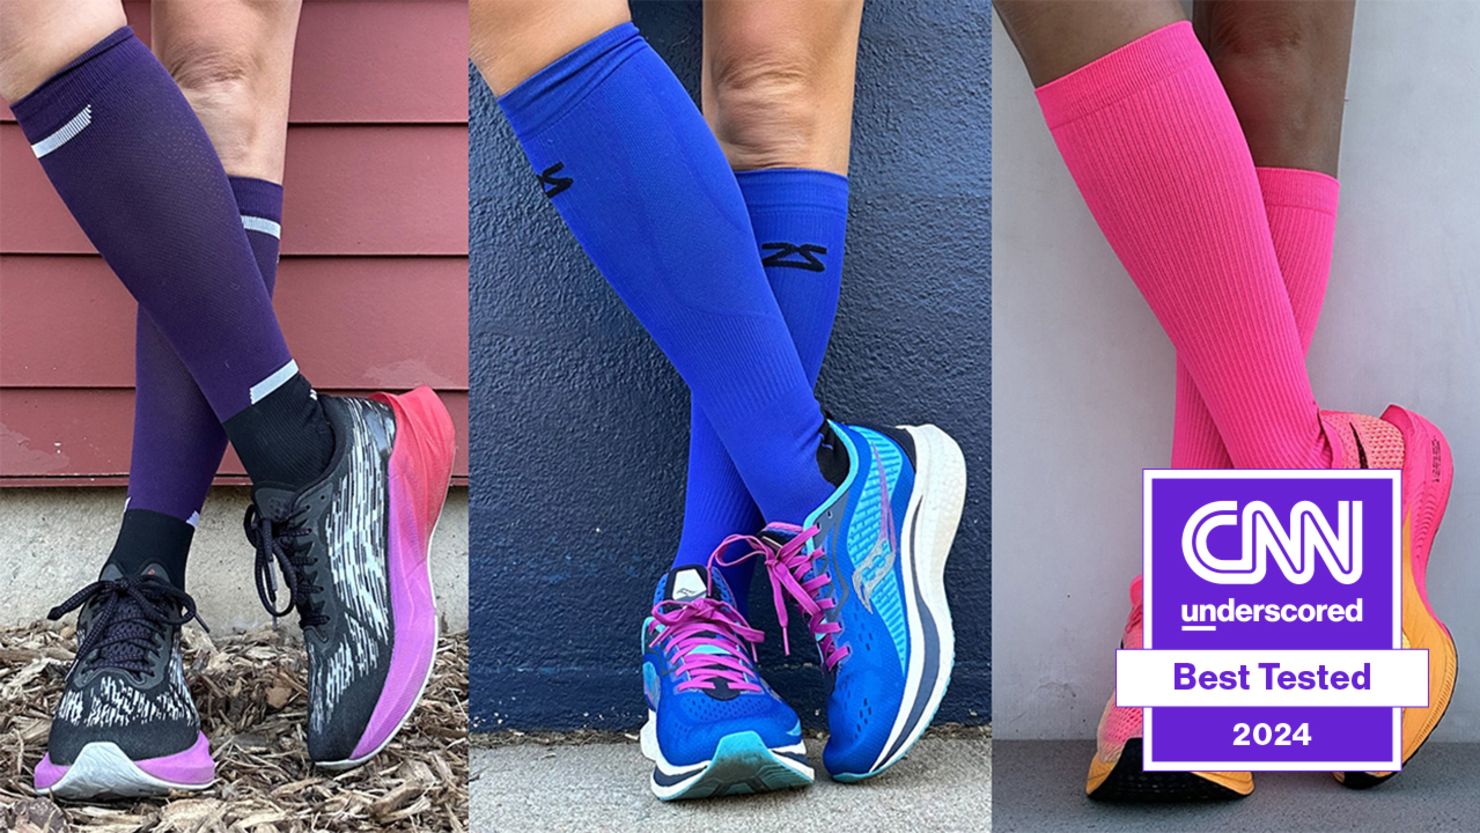 8 Best Compression Socks for Women in 2024, According to Testing